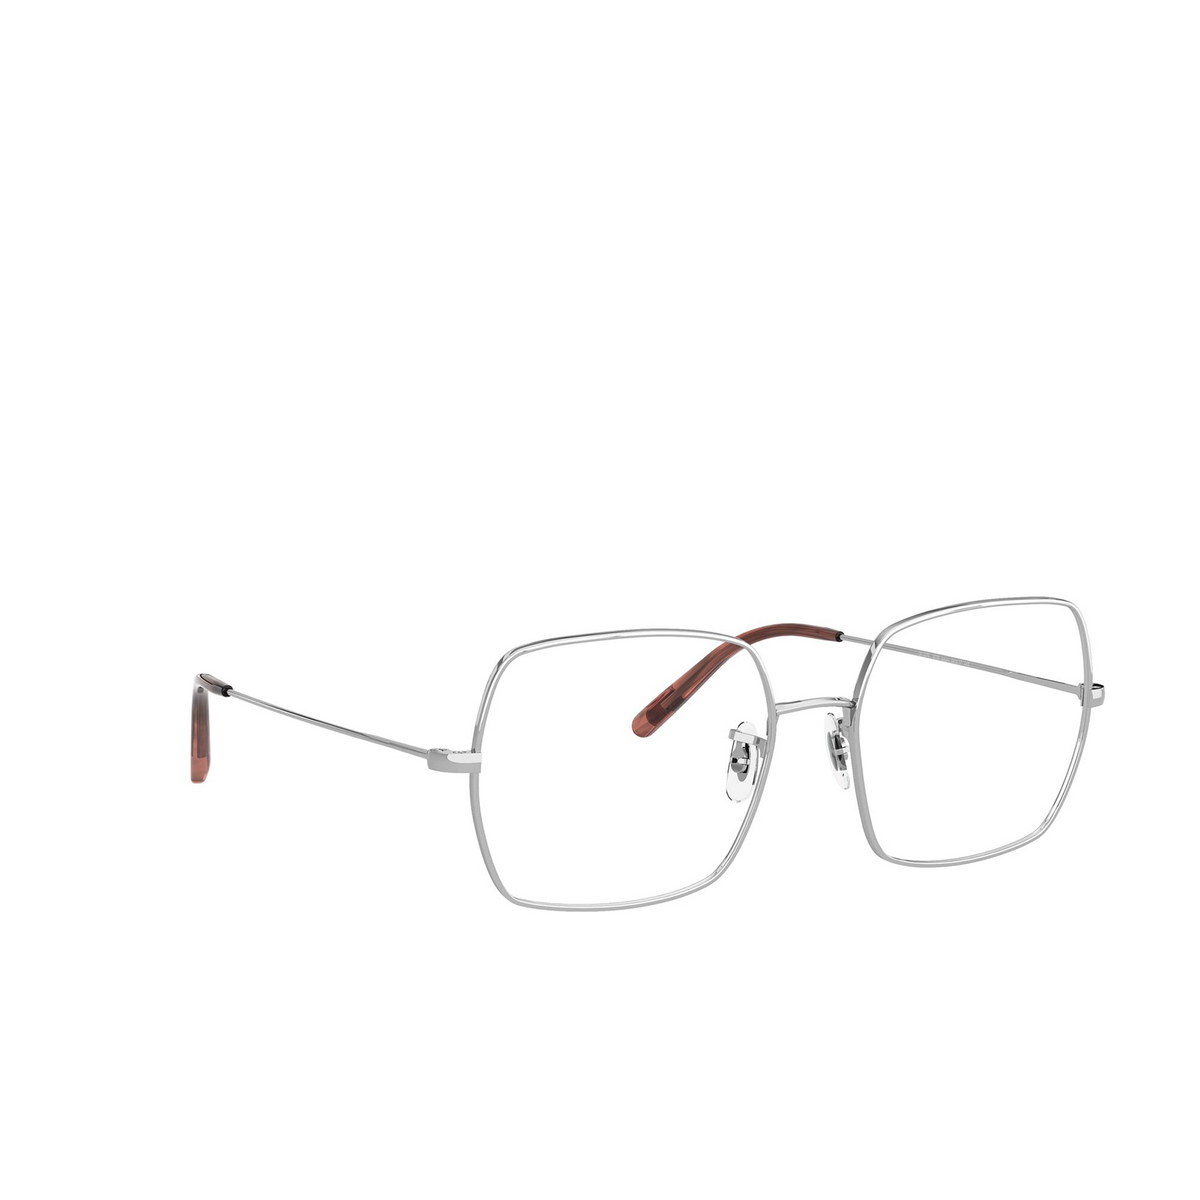 Oliver Peoples® Irregular Eyeglasses: Justyna OV1279 color Silver 5036 - three-quarters view.